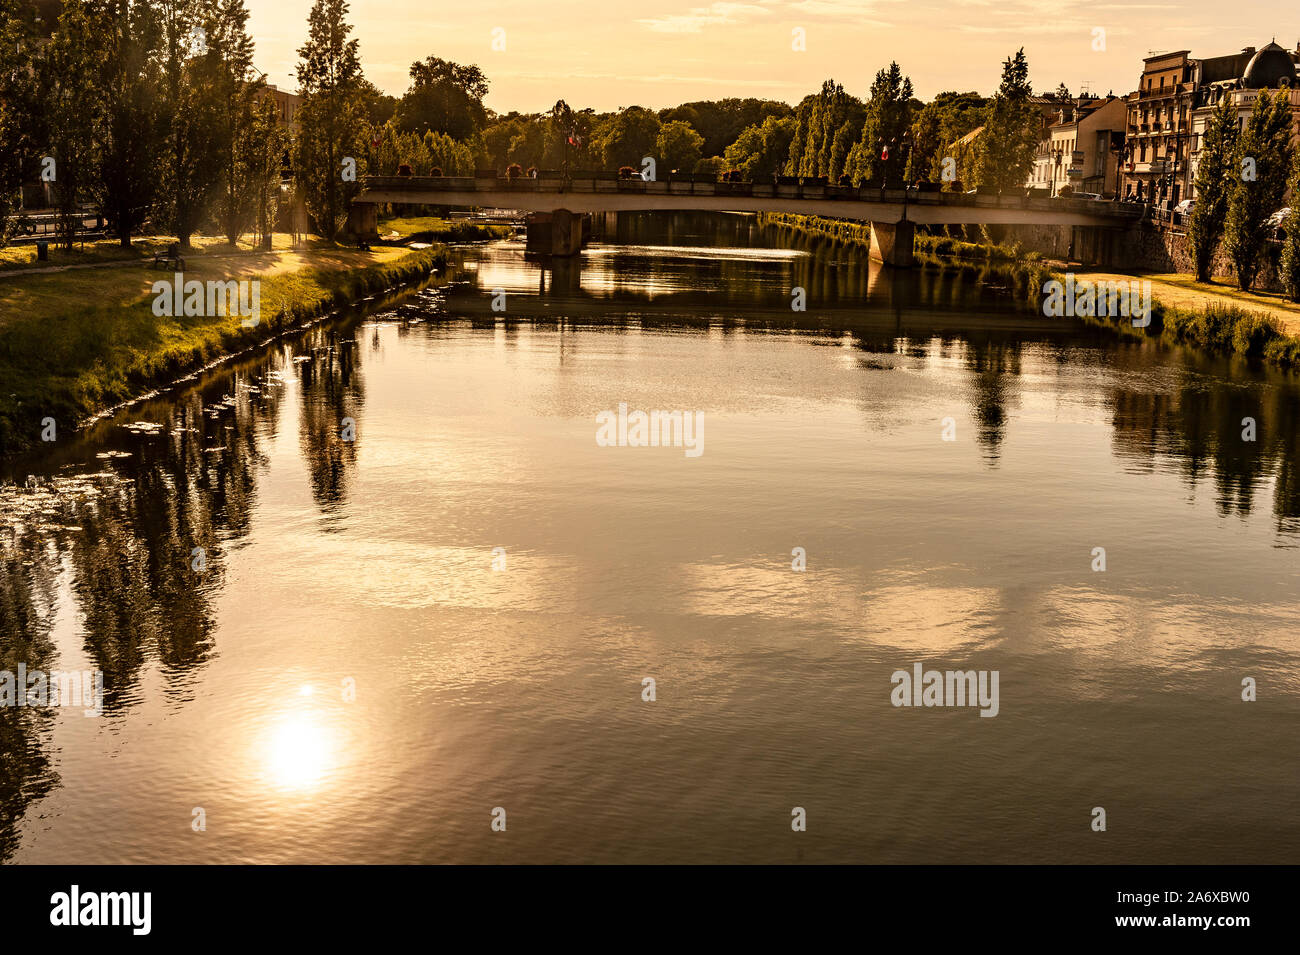 Early evening at Melun, a city in the Île-de-France, France Stock Photo